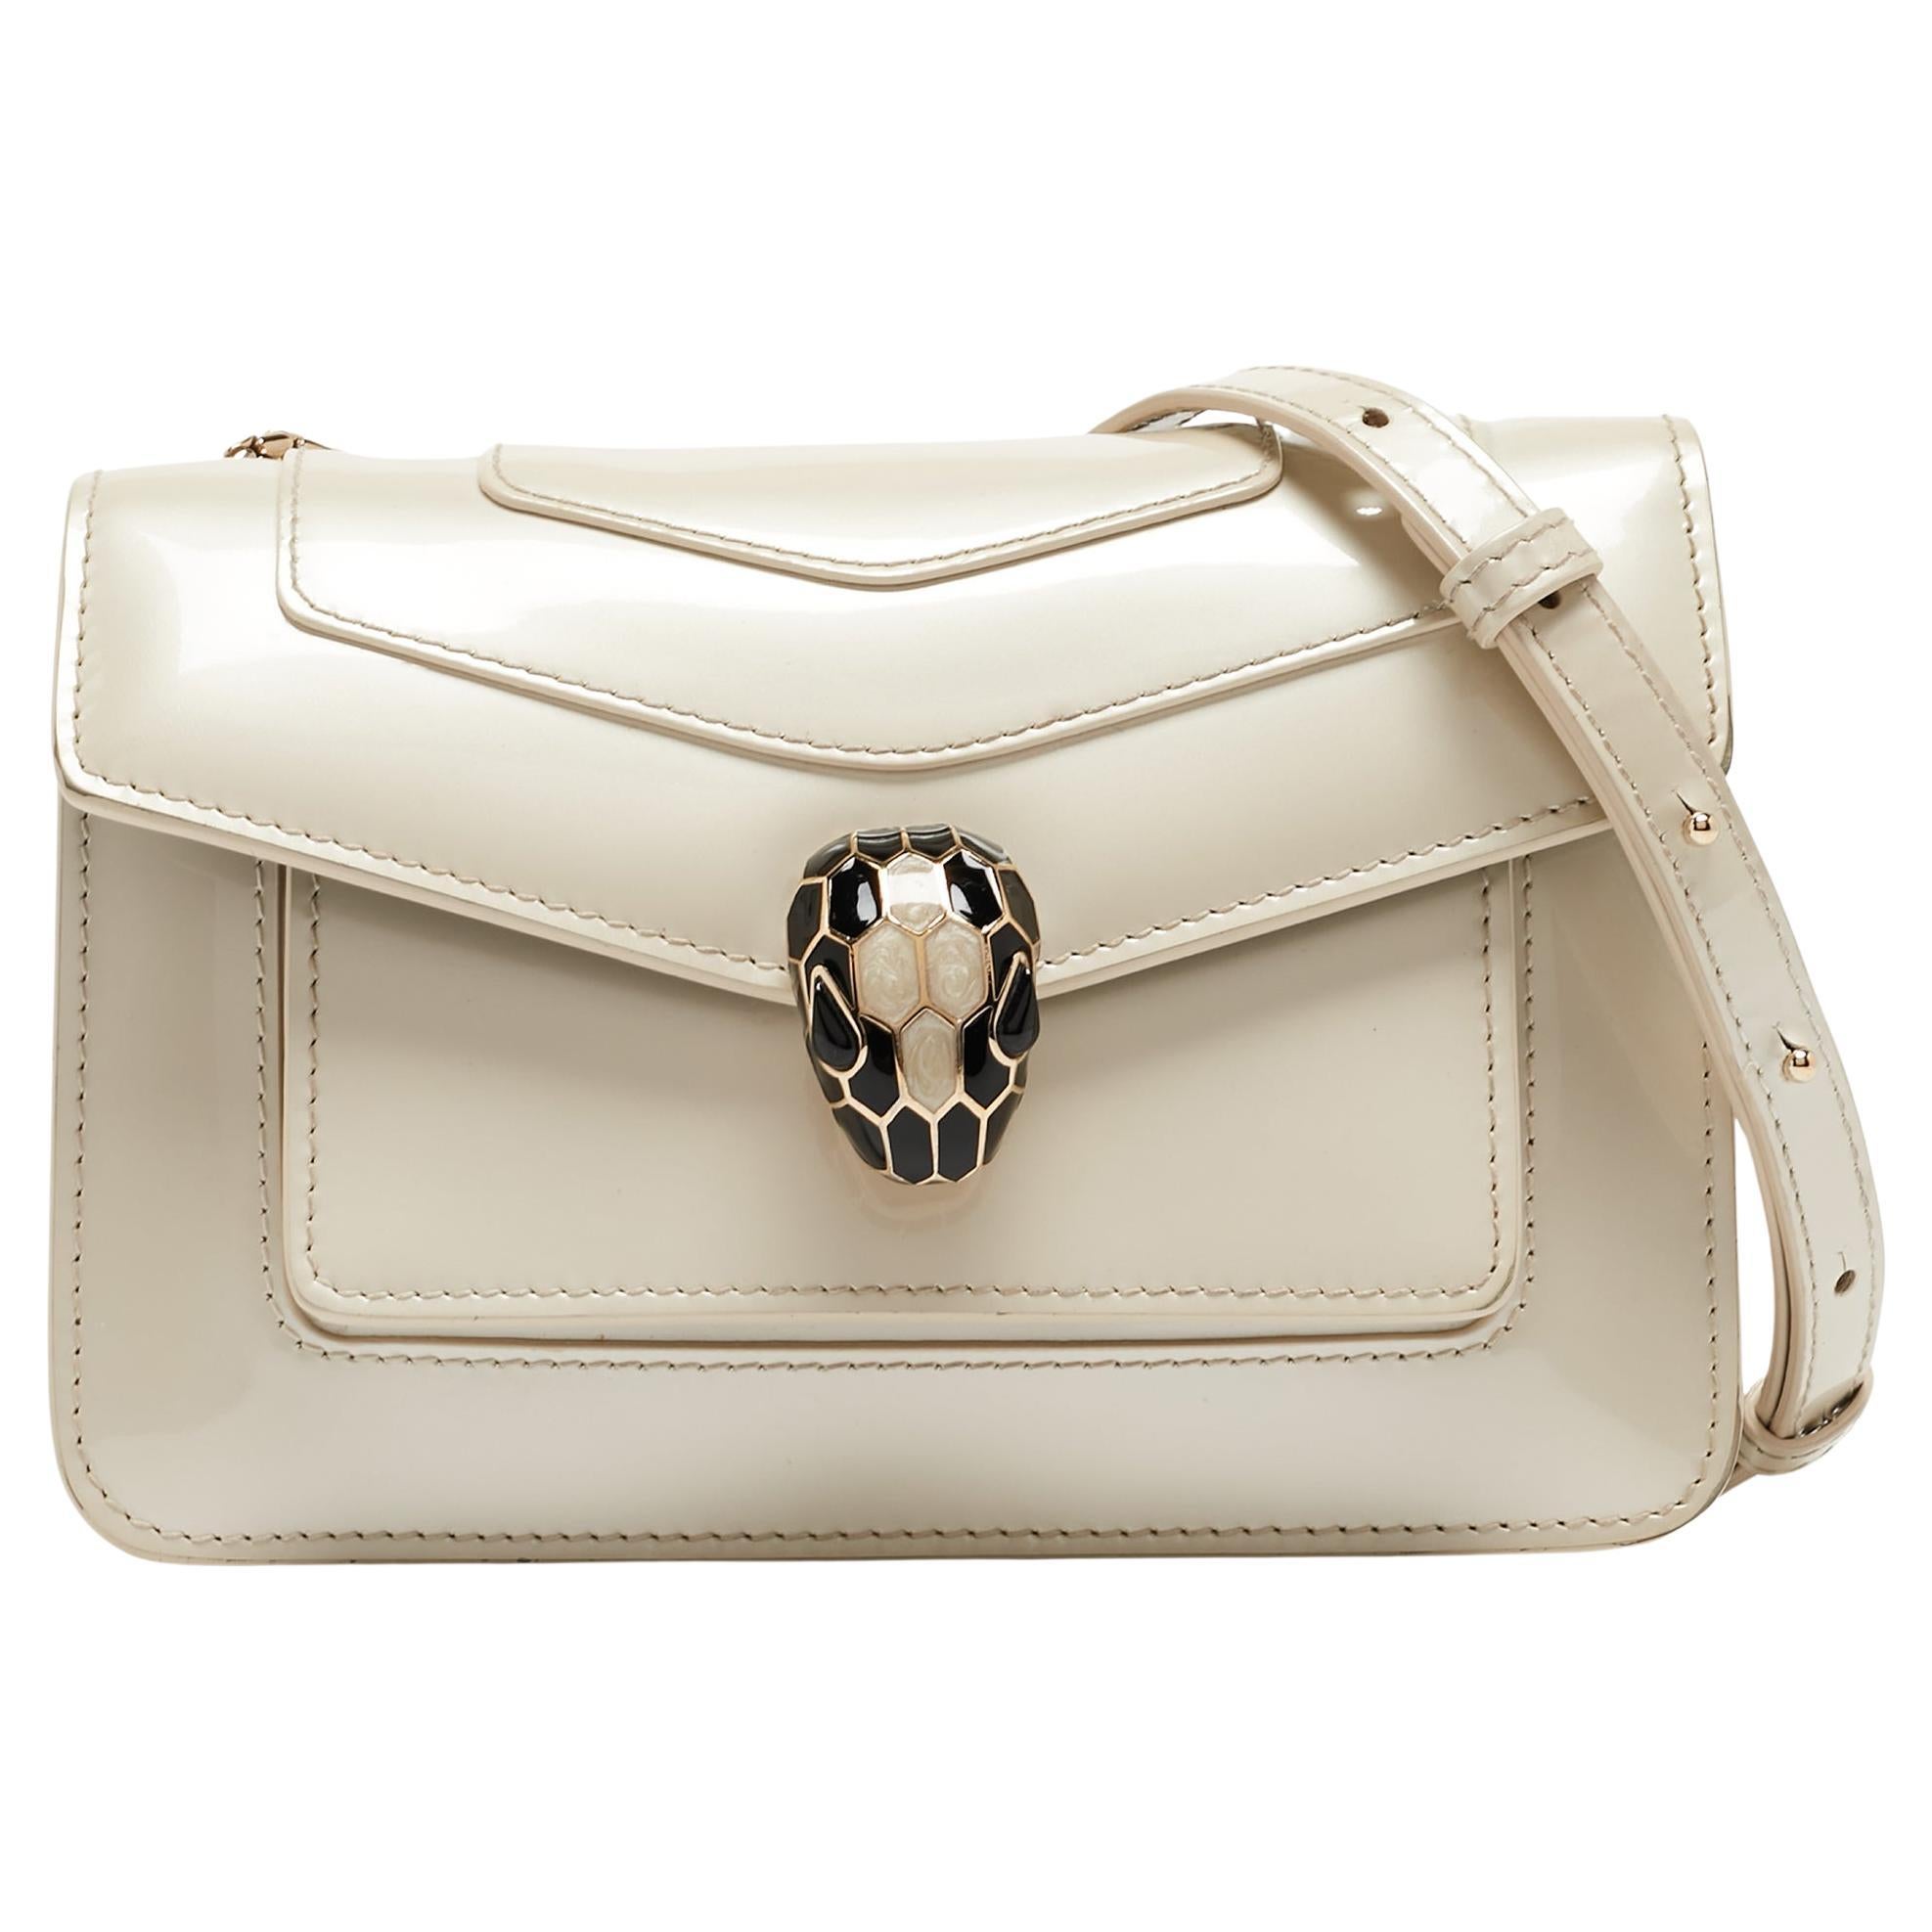 Bvlgari Off White Patent Leather Small Serpenti Forever Shoulder Bag For Sale